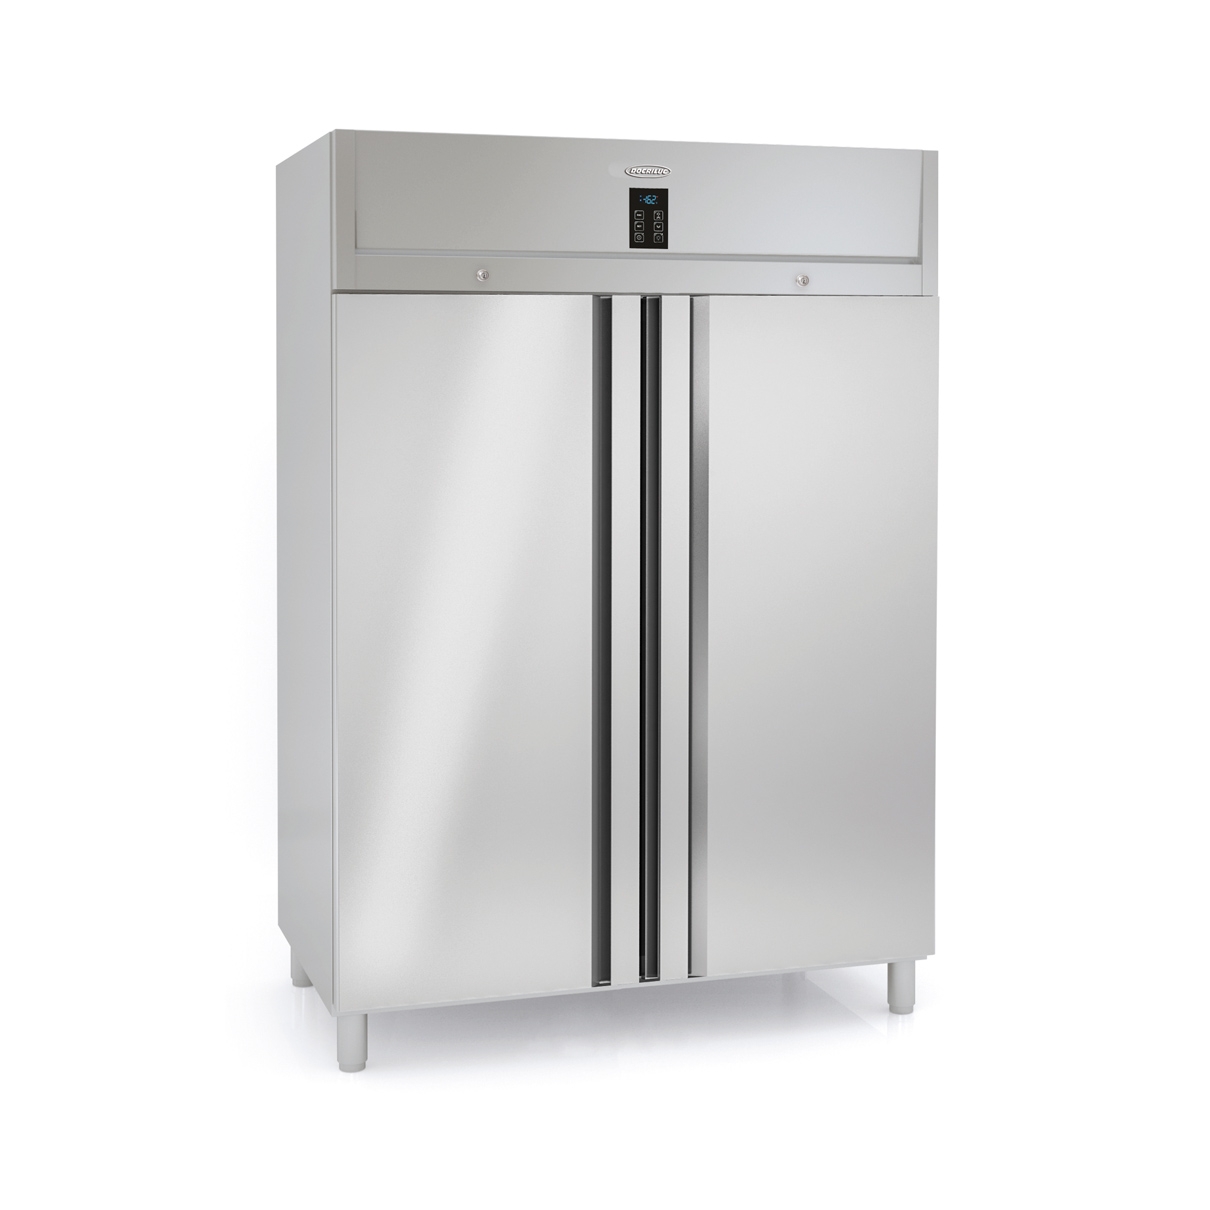 Gastronorm 2/1 High Efficiency Freezing Cabinet DHEGC-140-2